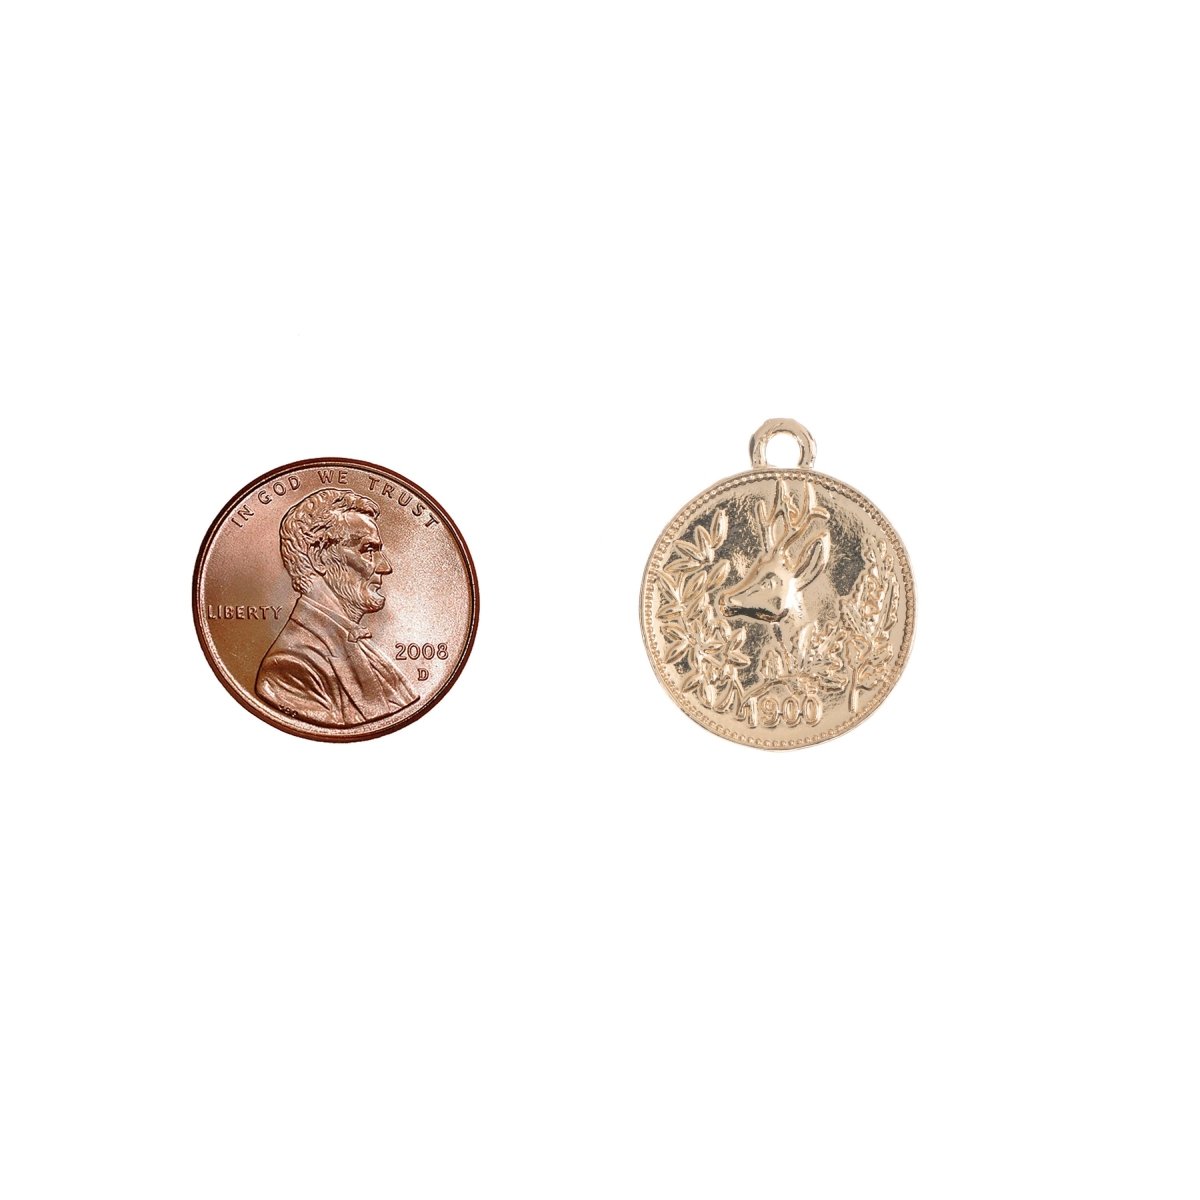 Dainty 18k Gold Filled Coin Bambi Charm Rustic Medallion for Bracelet Necklace Pendant Earring Findings for Jewelry Making C-237 - DLUXCA